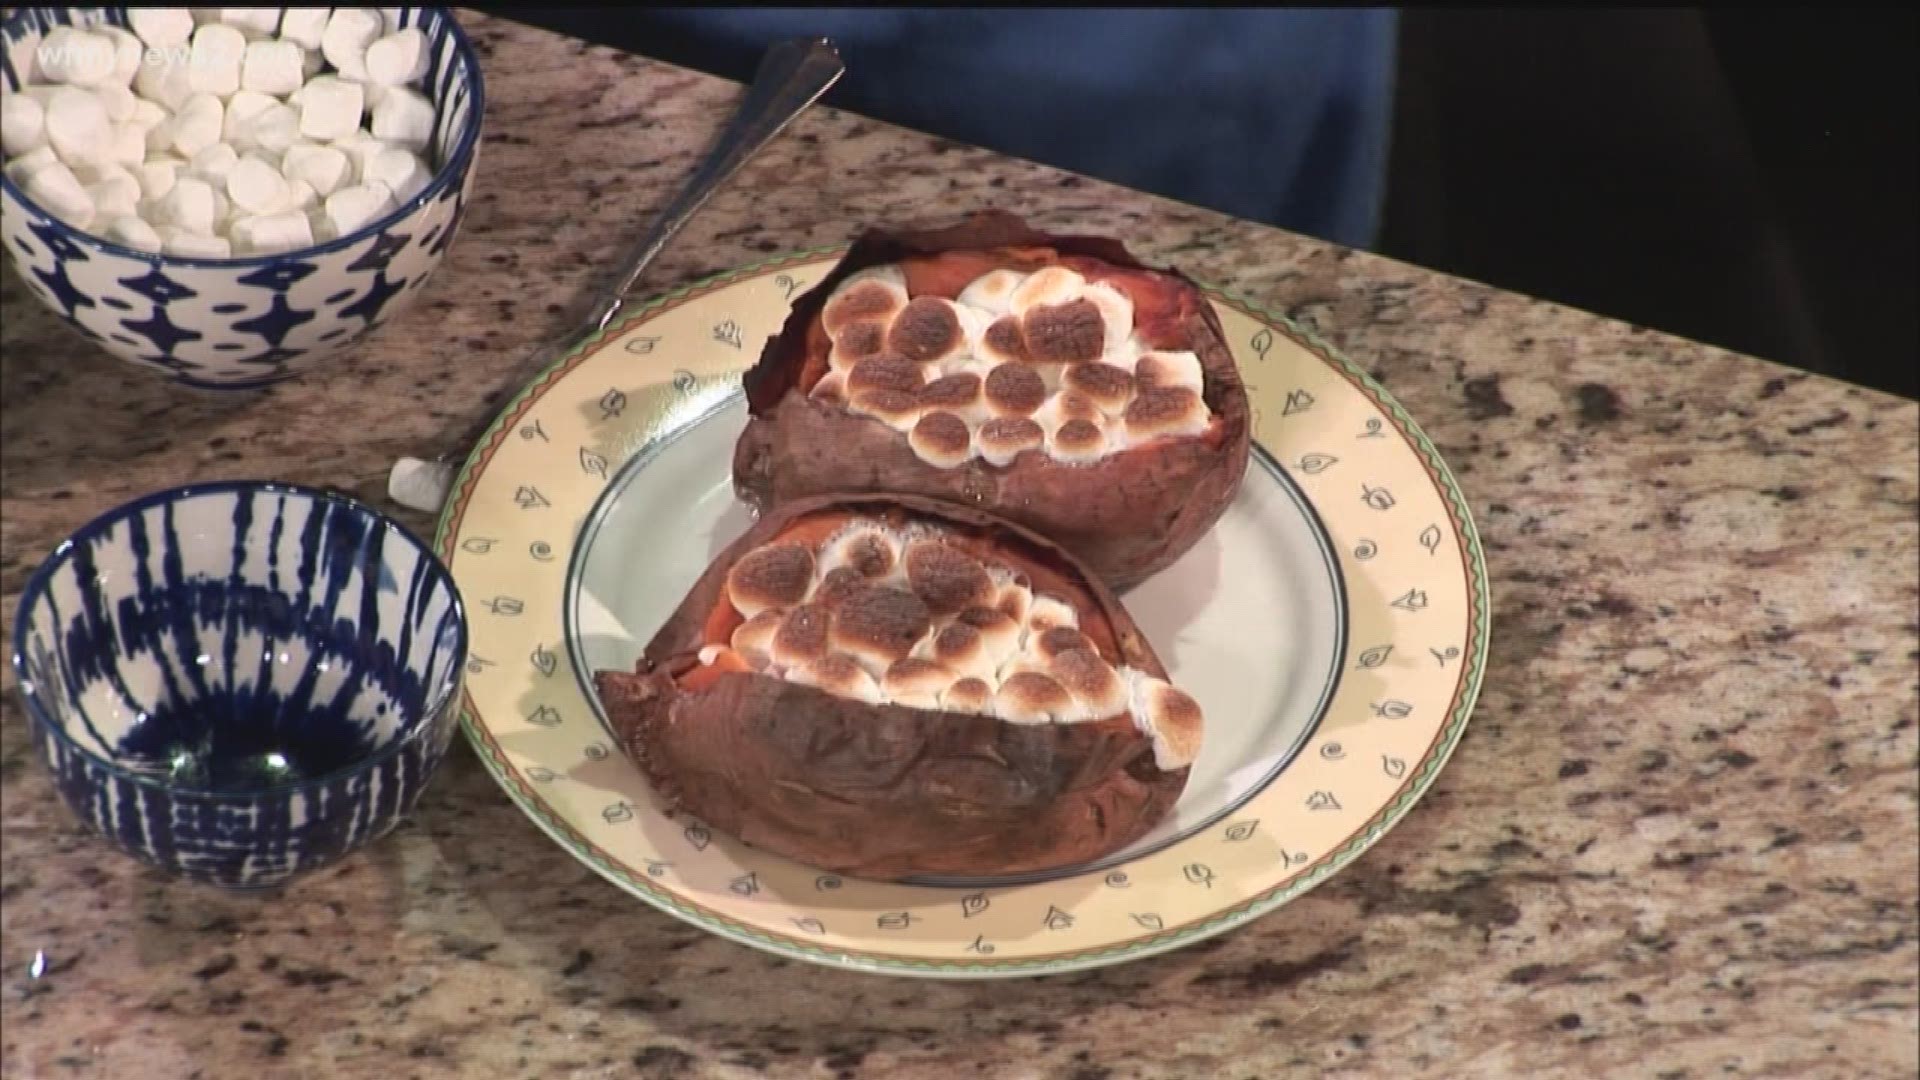 Texas Roadhouse is back with recipes for their famous mashed potatoes and sweet potato.